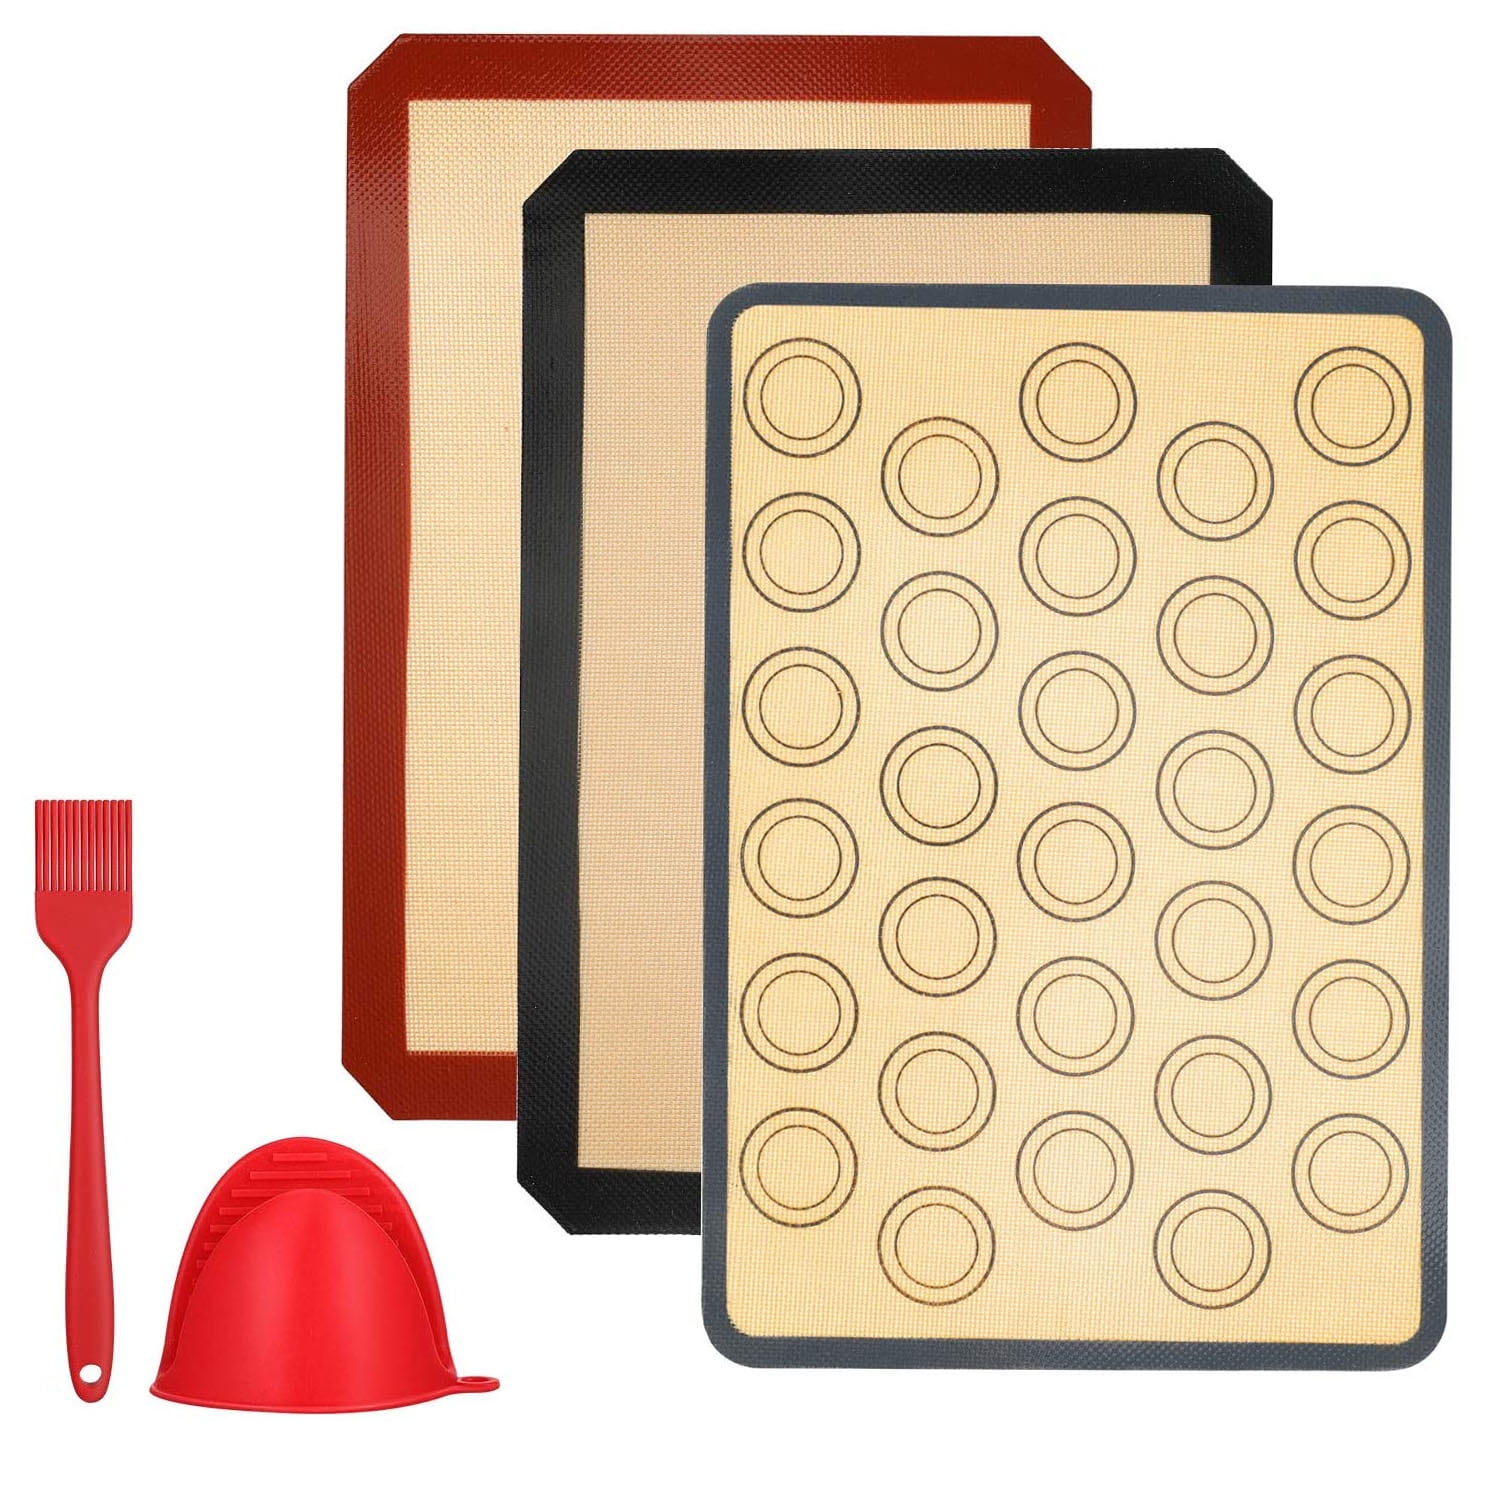 Silicone Baking Mat Tray Oven Liner Cake Pads Pastry Pizza Work Sheet Washable 